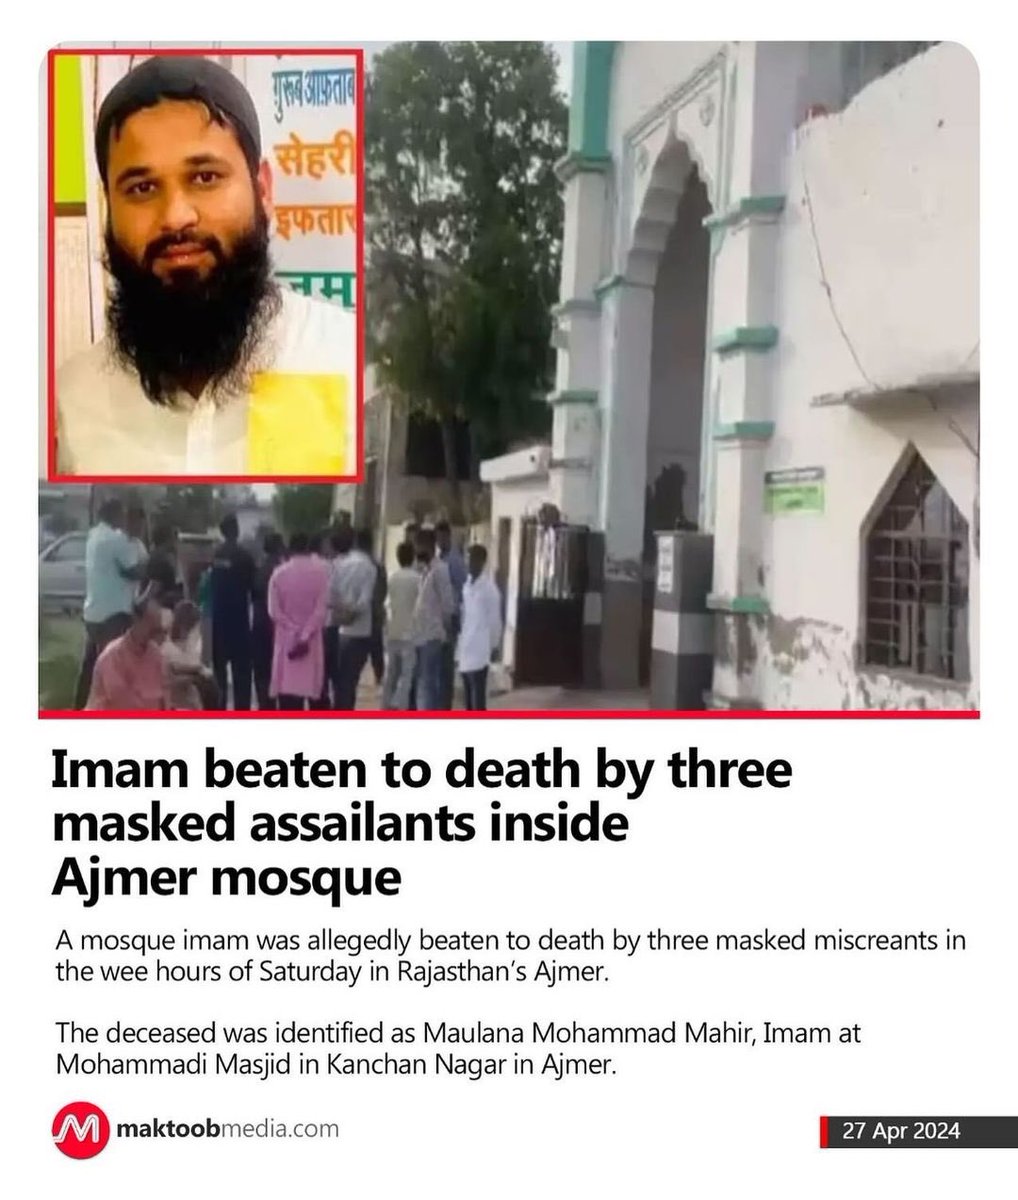 Some people entered the mosque in Ajmer and killed an innocent Imam.
 #JusticeForAjmerImam